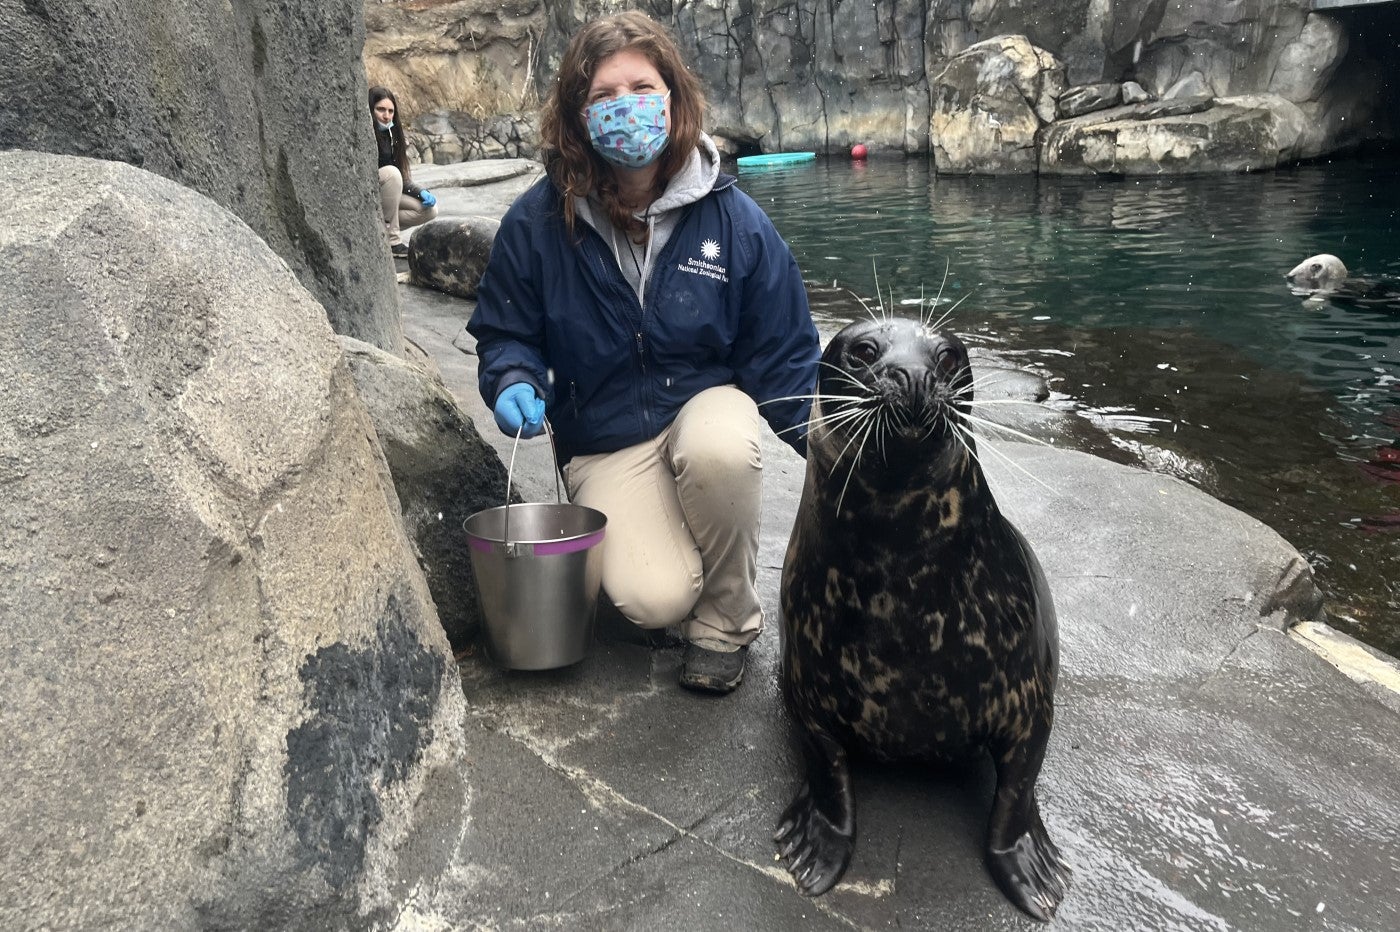 Animal keeper, Diana Vogel kneels next to harbor seal, Rabbit, in the outdoor enclosure. They are on hard ground and there is rock work to their left. To the right is water and a gray seal pops its head out of the water in the back.